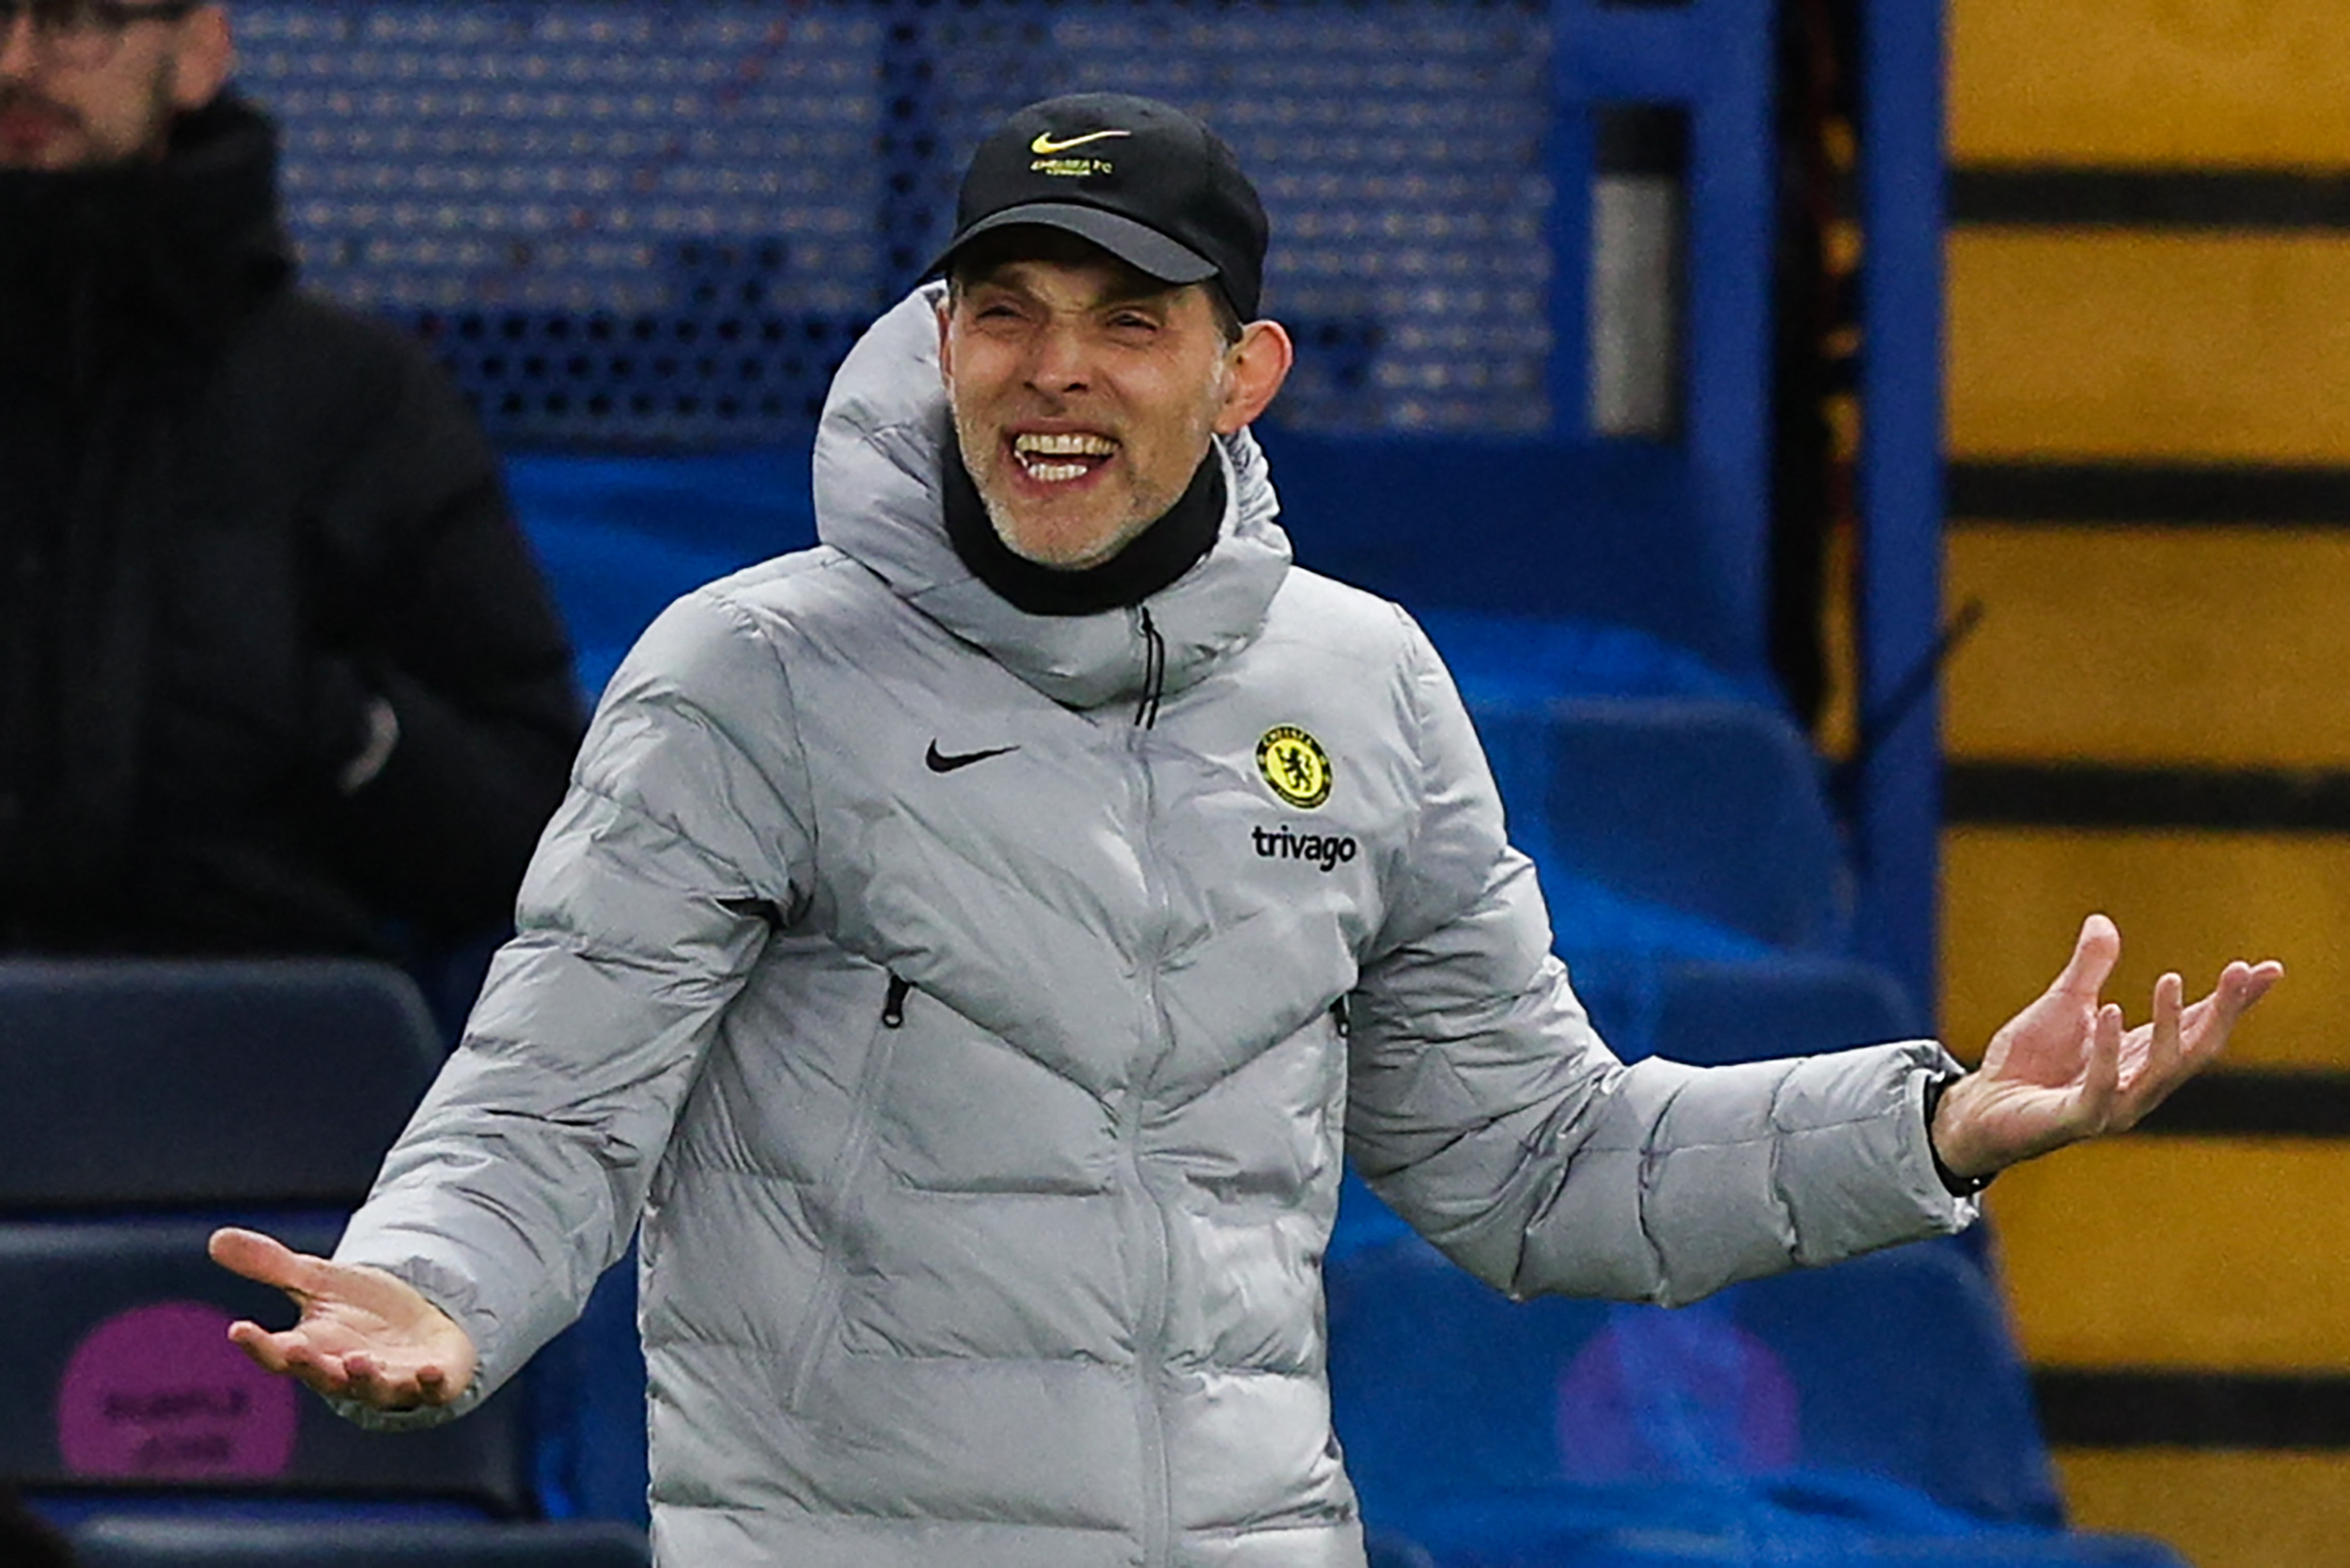 Thomas Tuchel opens up on Chelsea exit and reveals surprise at sudden exit.